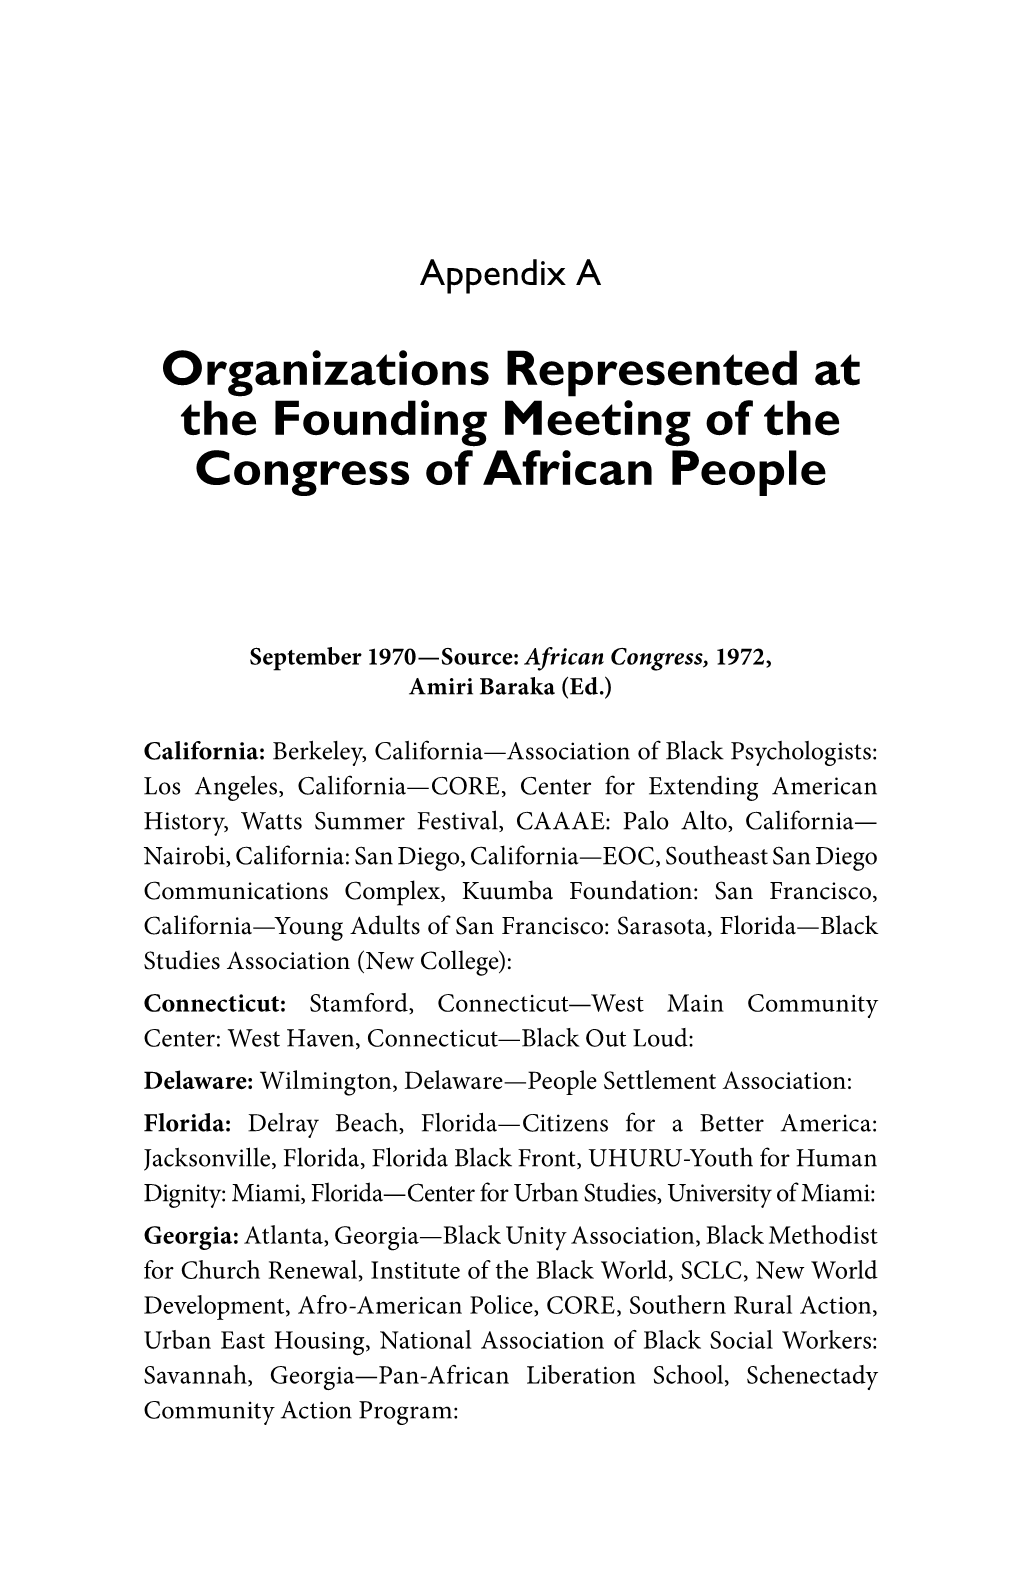 Organizations Represented at the Founding Meeting of the Congress of African People